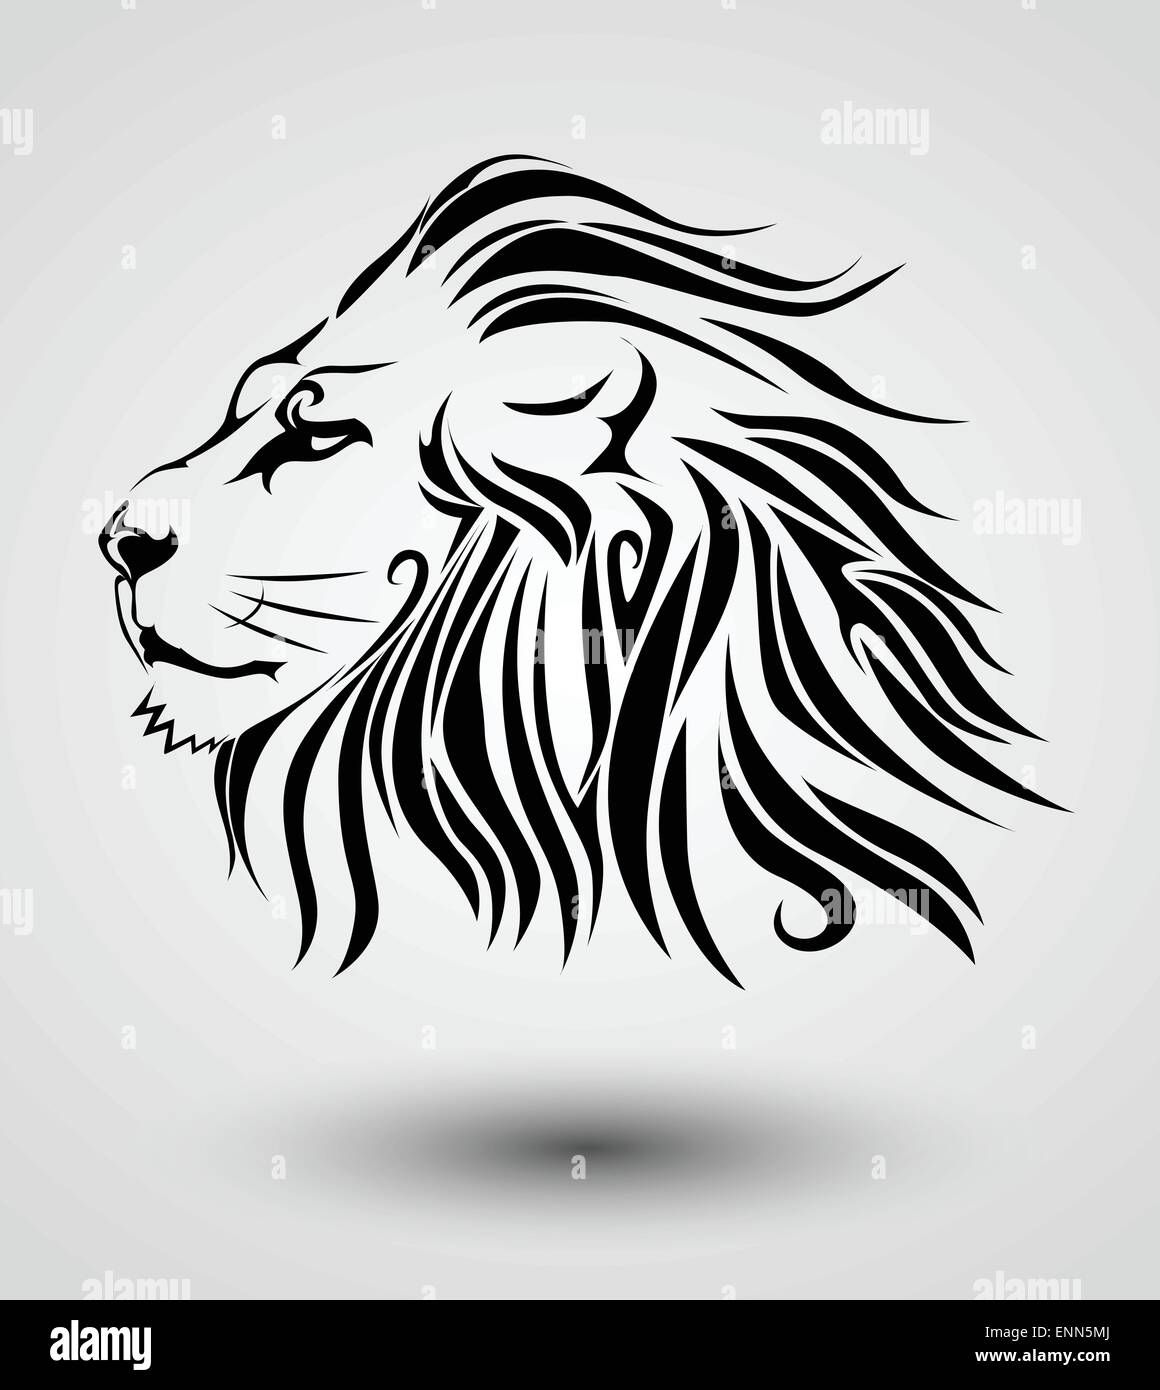 40 Tribal Lion Tattoo Designs For Men  Mighty Feline Ink Ideas  Tribal  lion tattoo Tribal chest tattoos Tribal lion